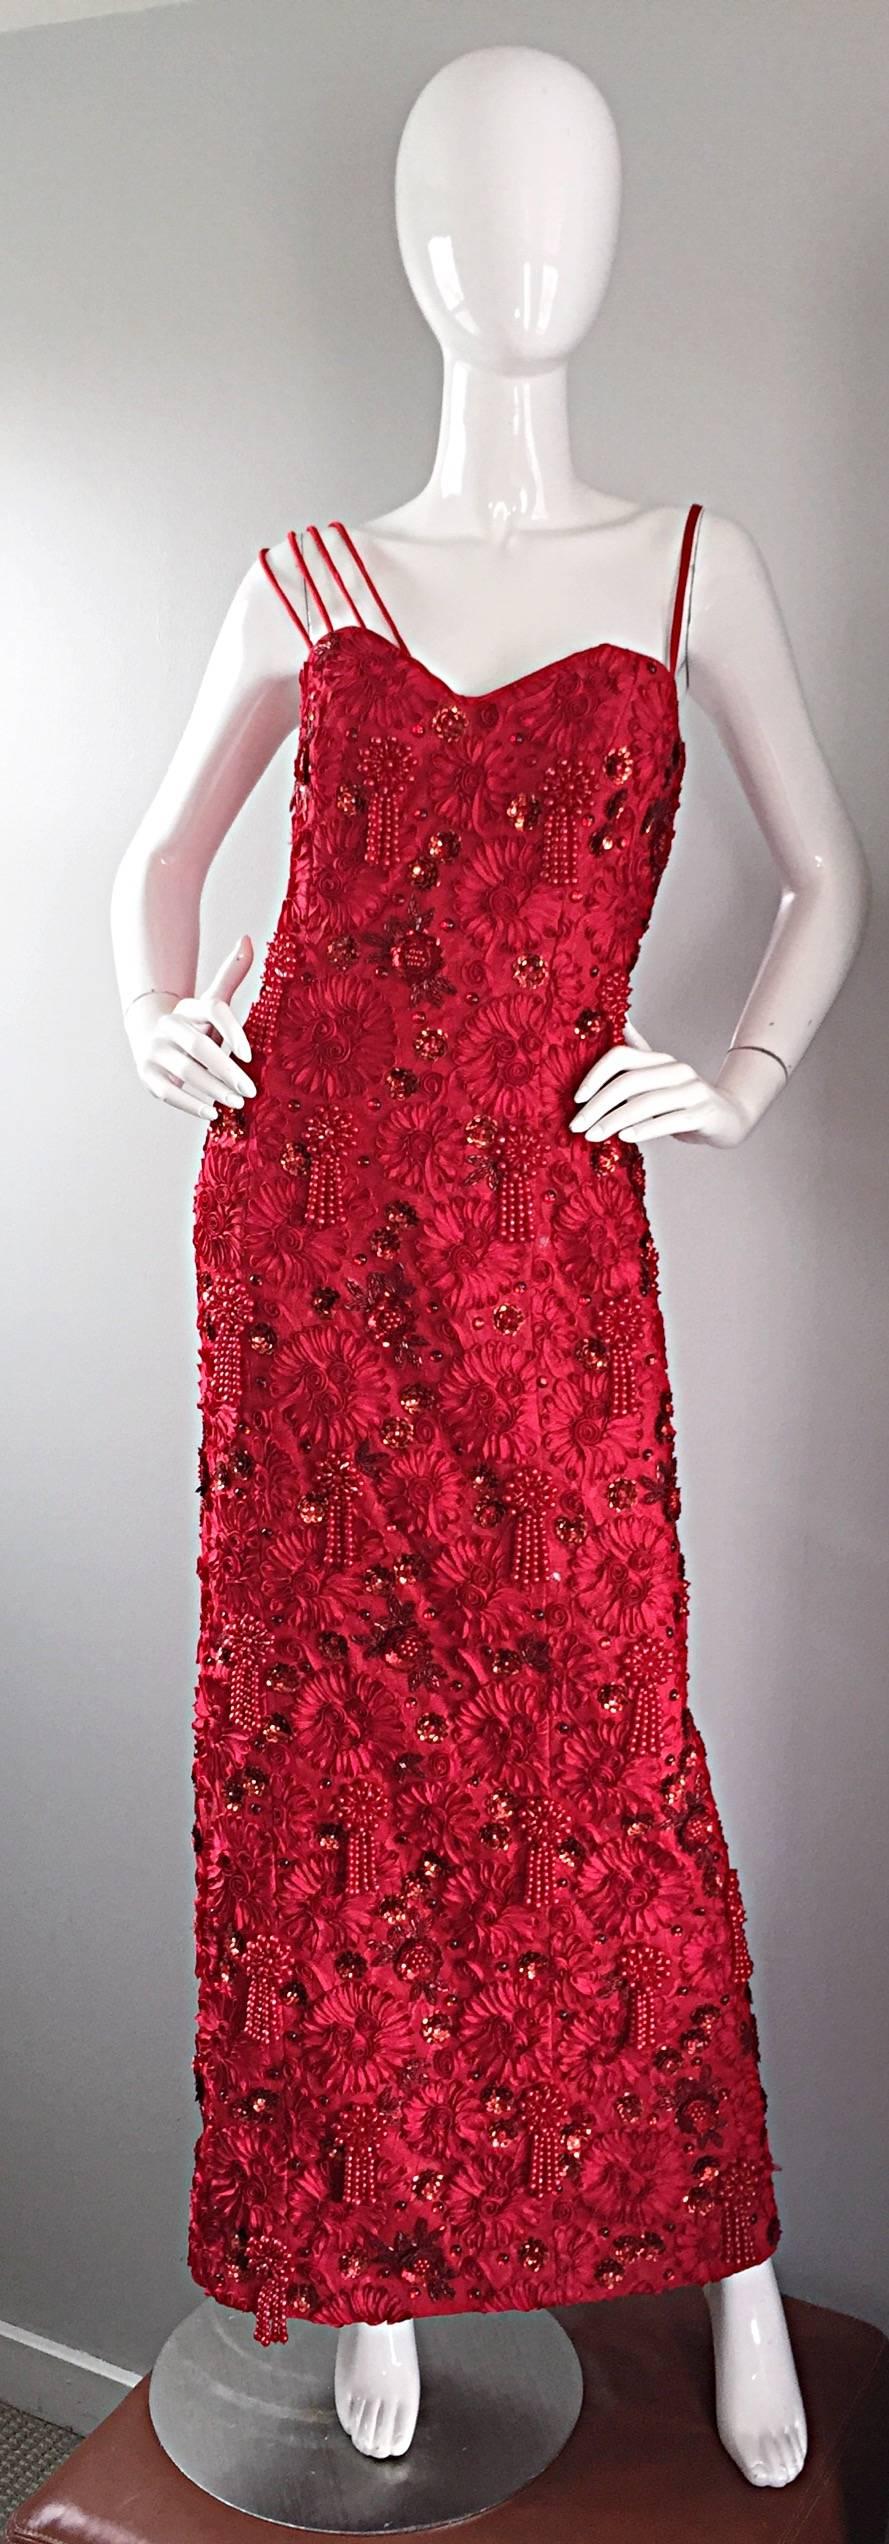 Divine custom made vintage cherry red larger plus size couture dress! Hand-sewn lace, sequins and thousands of beads throughout the entire gown. Features three straps on one shoulder, and one strap on the other. Heavy duty full metal zipper up the